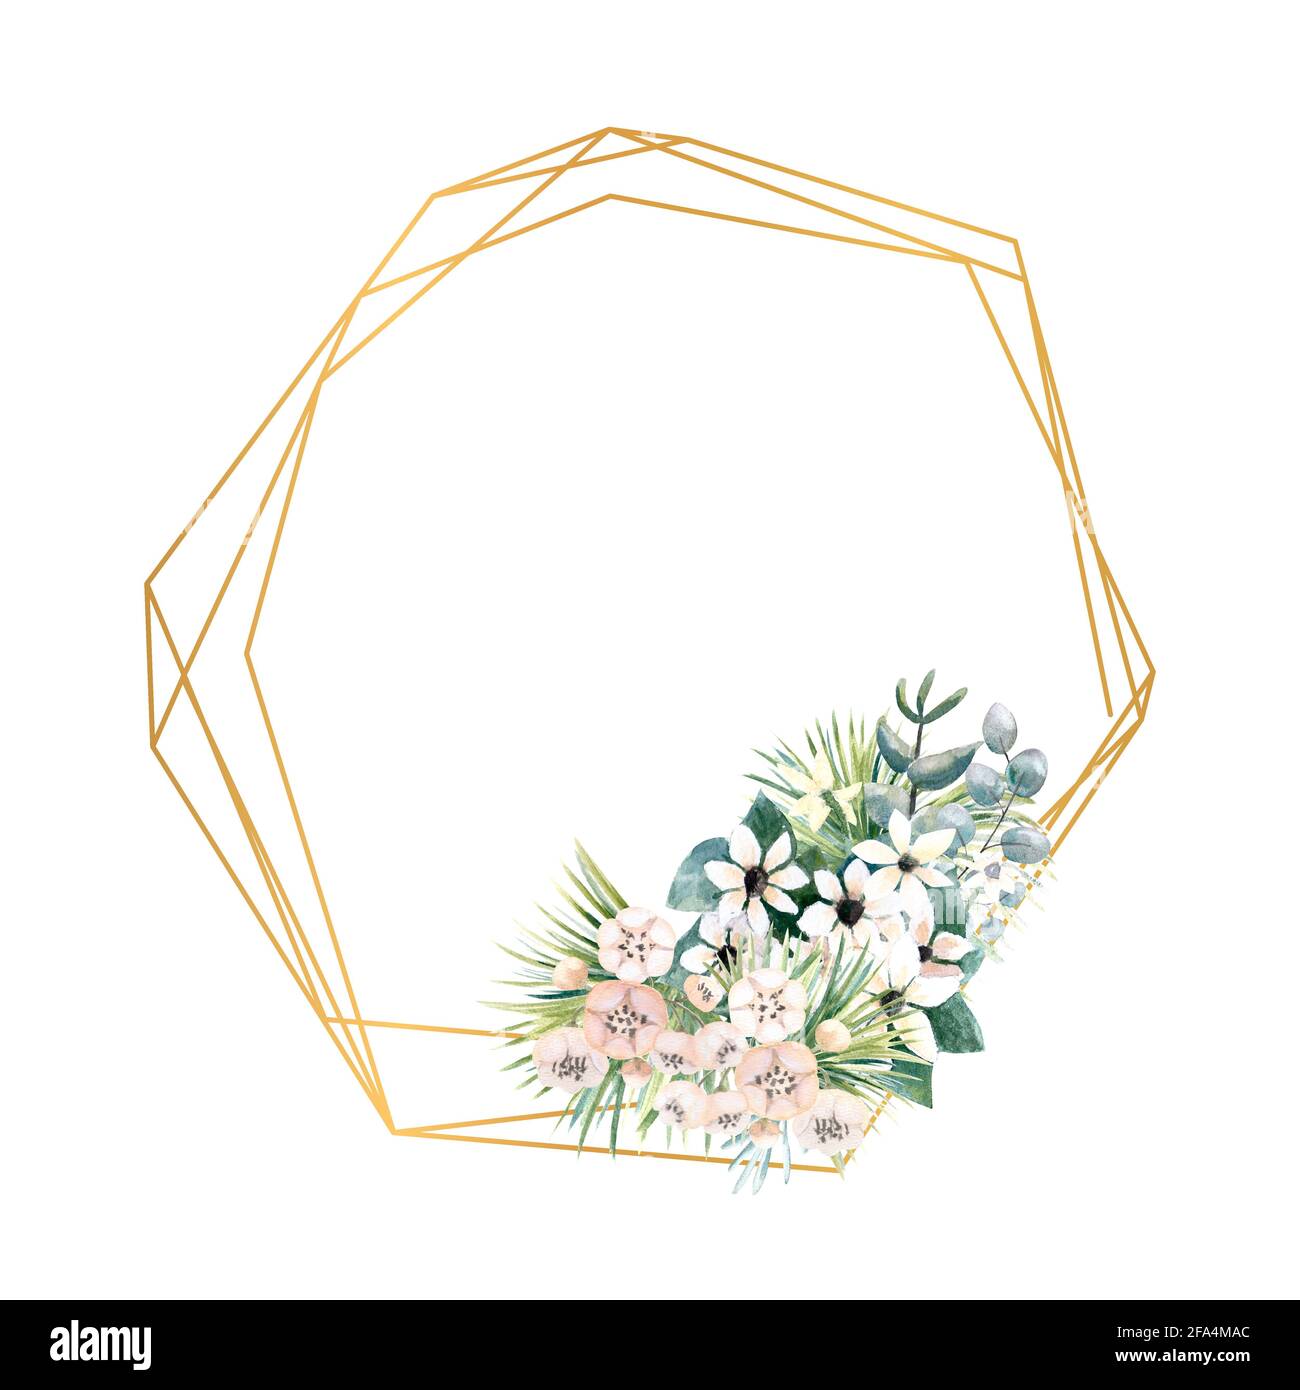 Geometric gold frame with small flowers of actinidia, bouvardia, tropical and palm leaves. Wedding bouquet in a frame for the design of a stylish Stock Photo